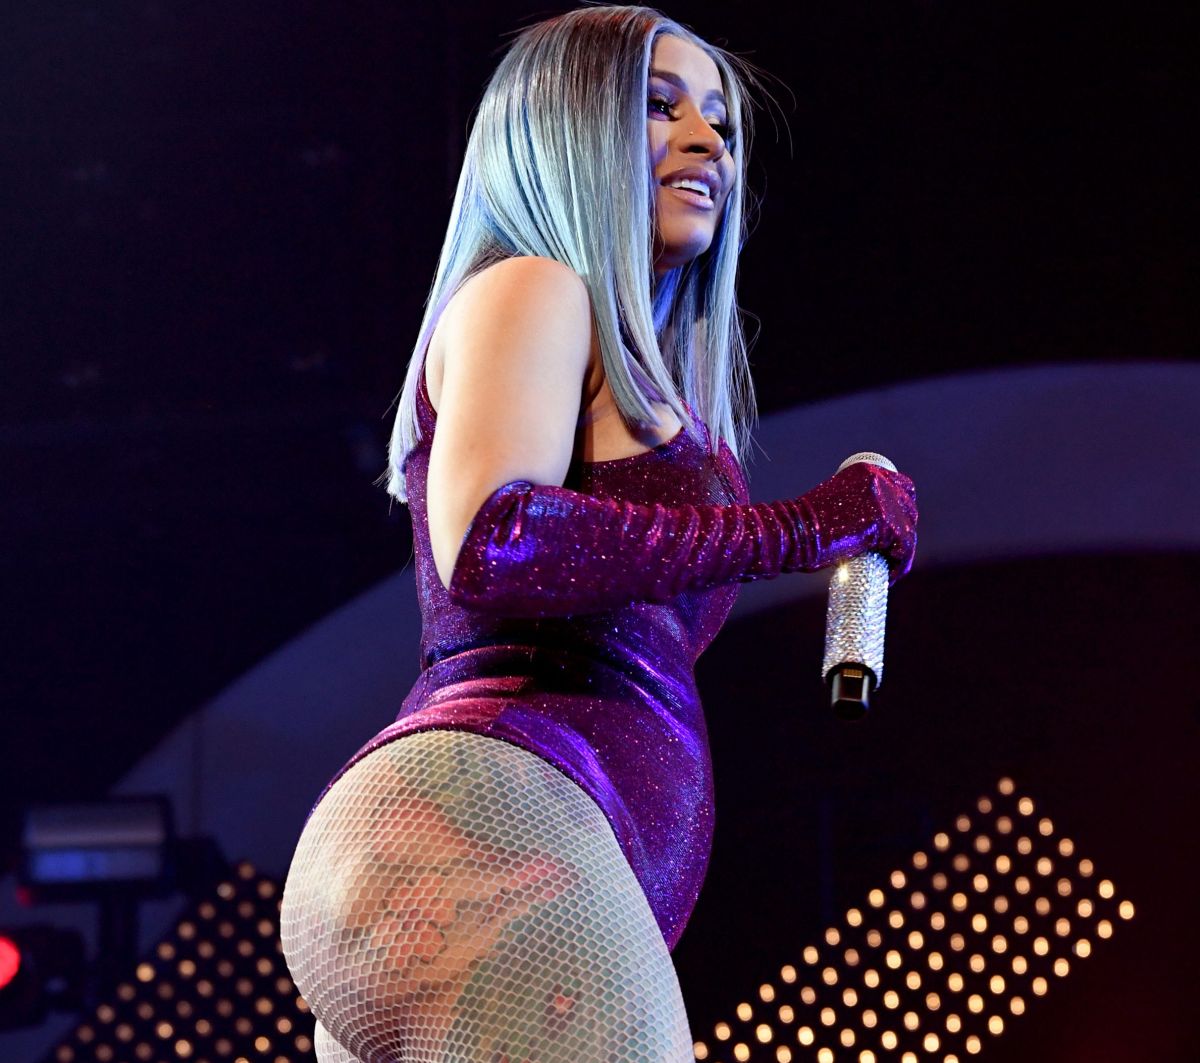 Cardi B boasts minimal bikinis and even dental floss with her advanced pregnancy and turns on social networks